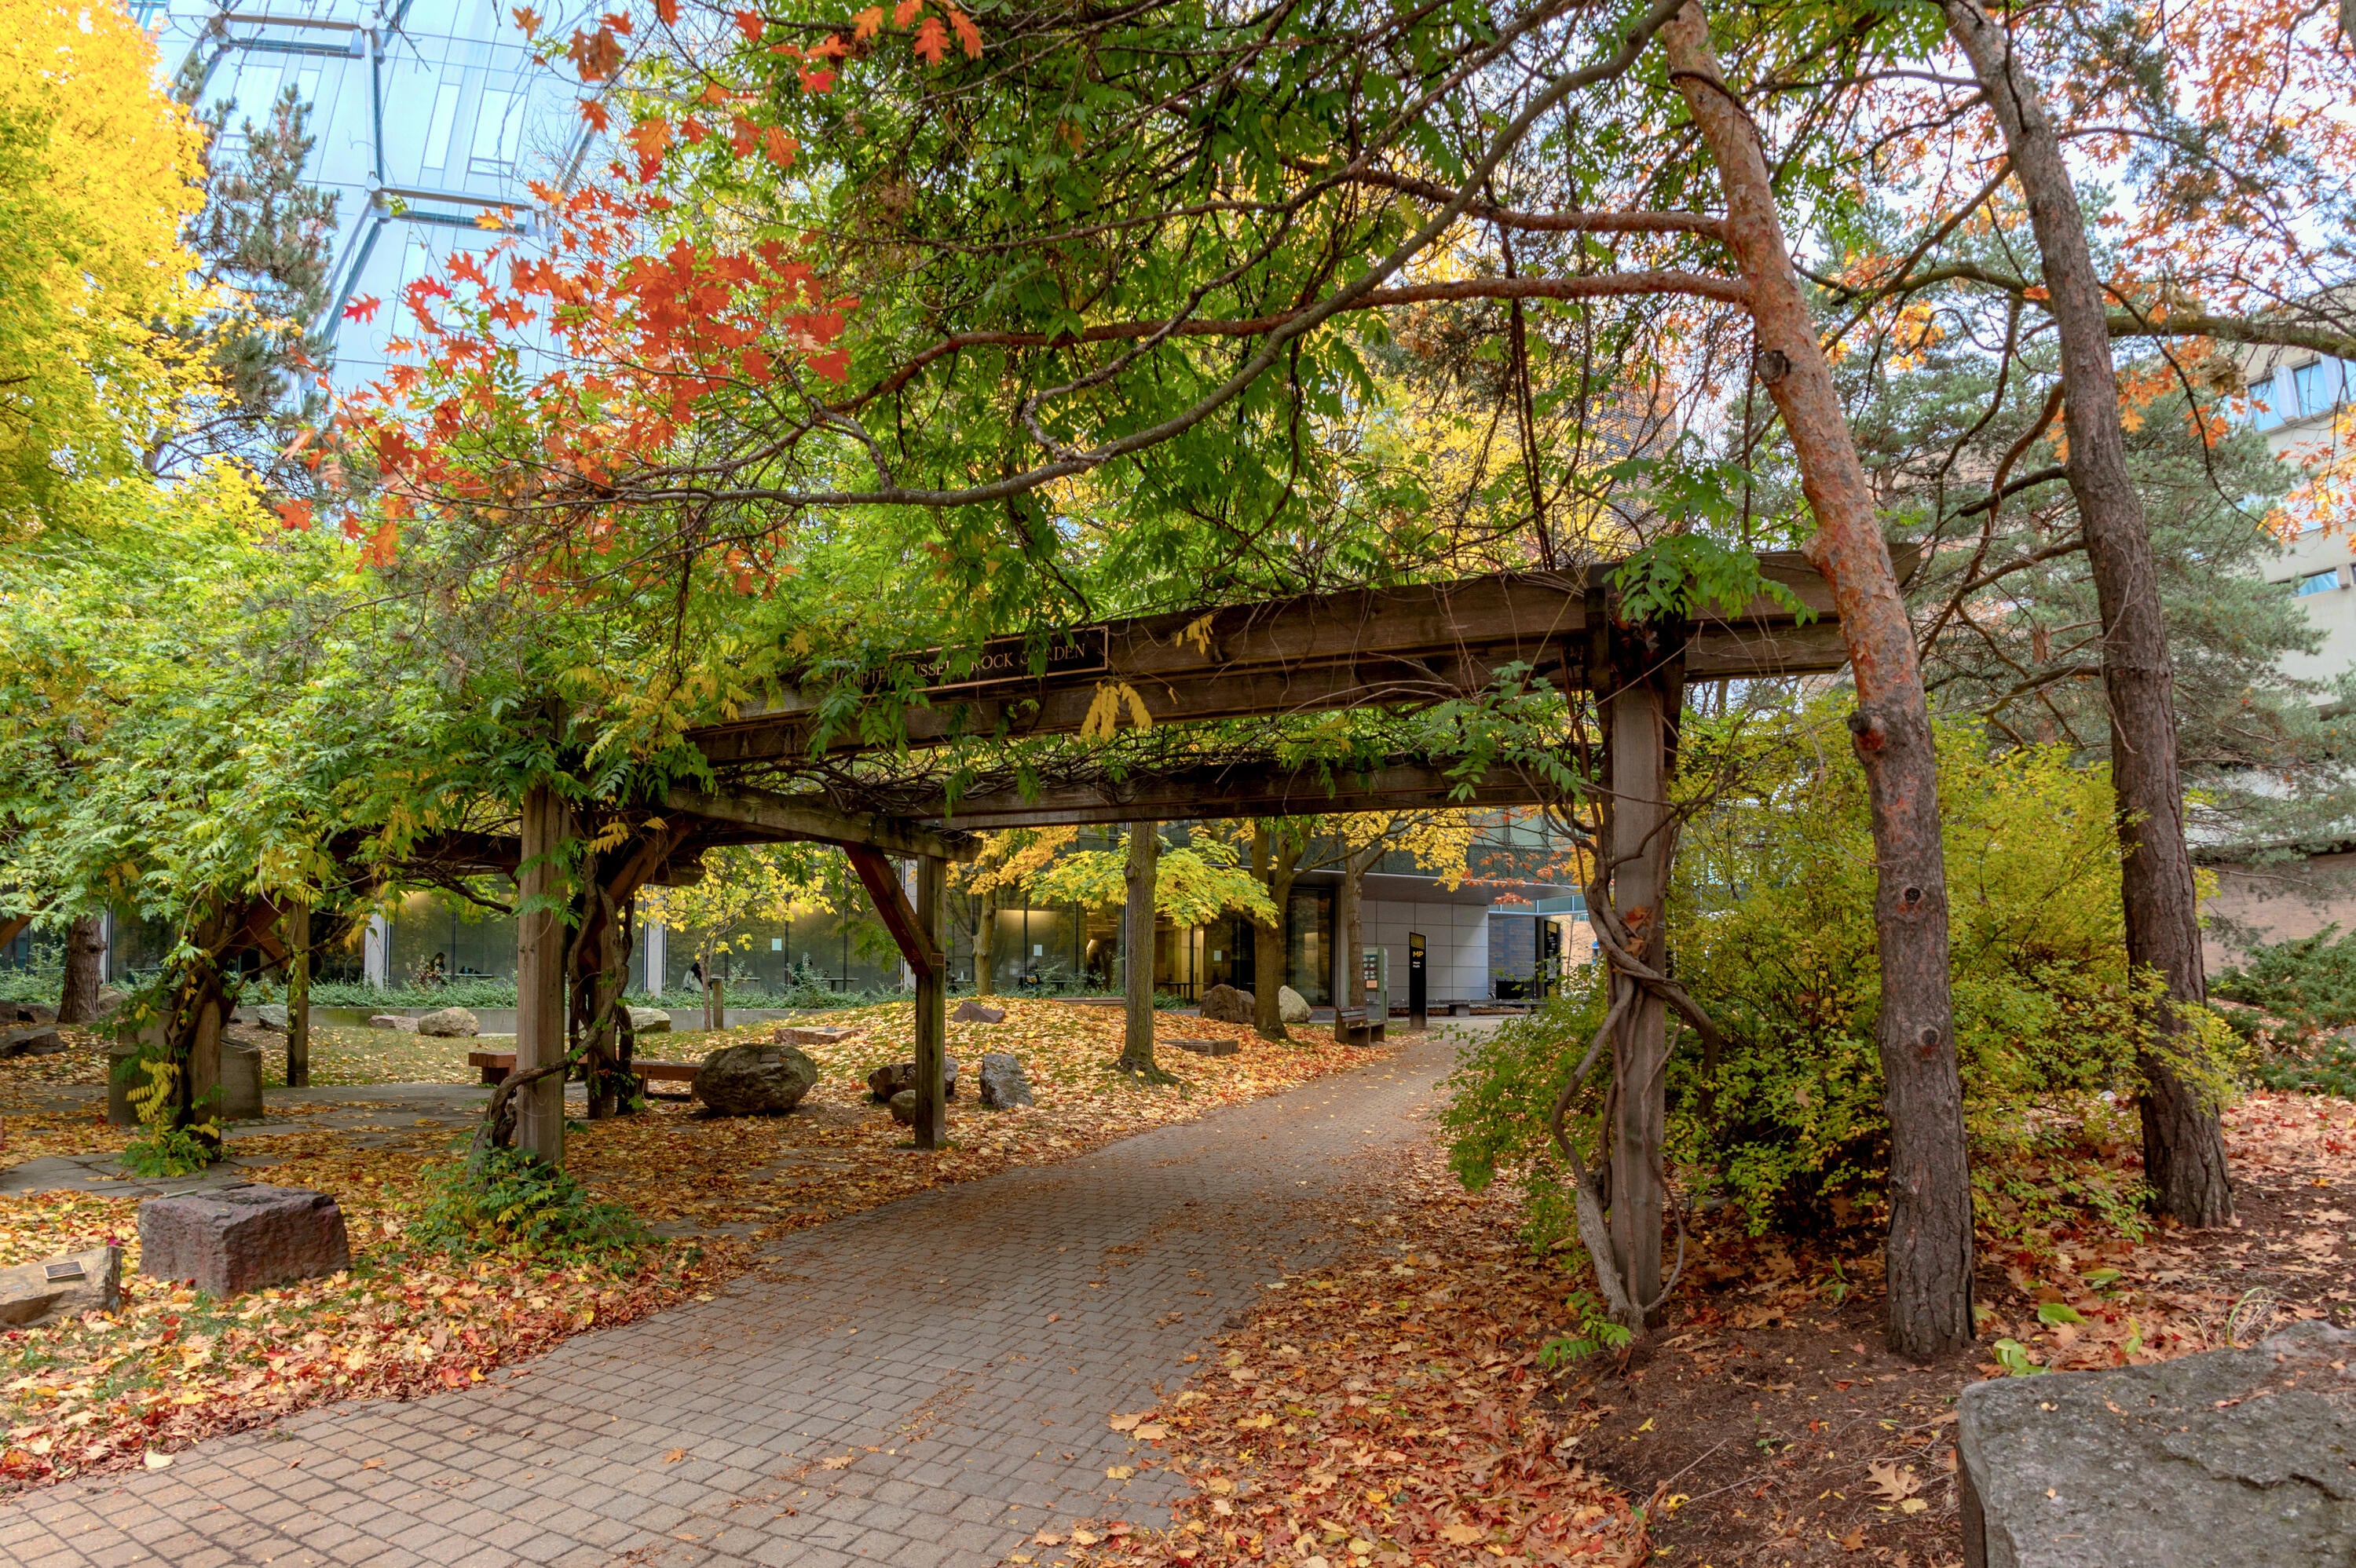 Pathway within the UW campus during fall season